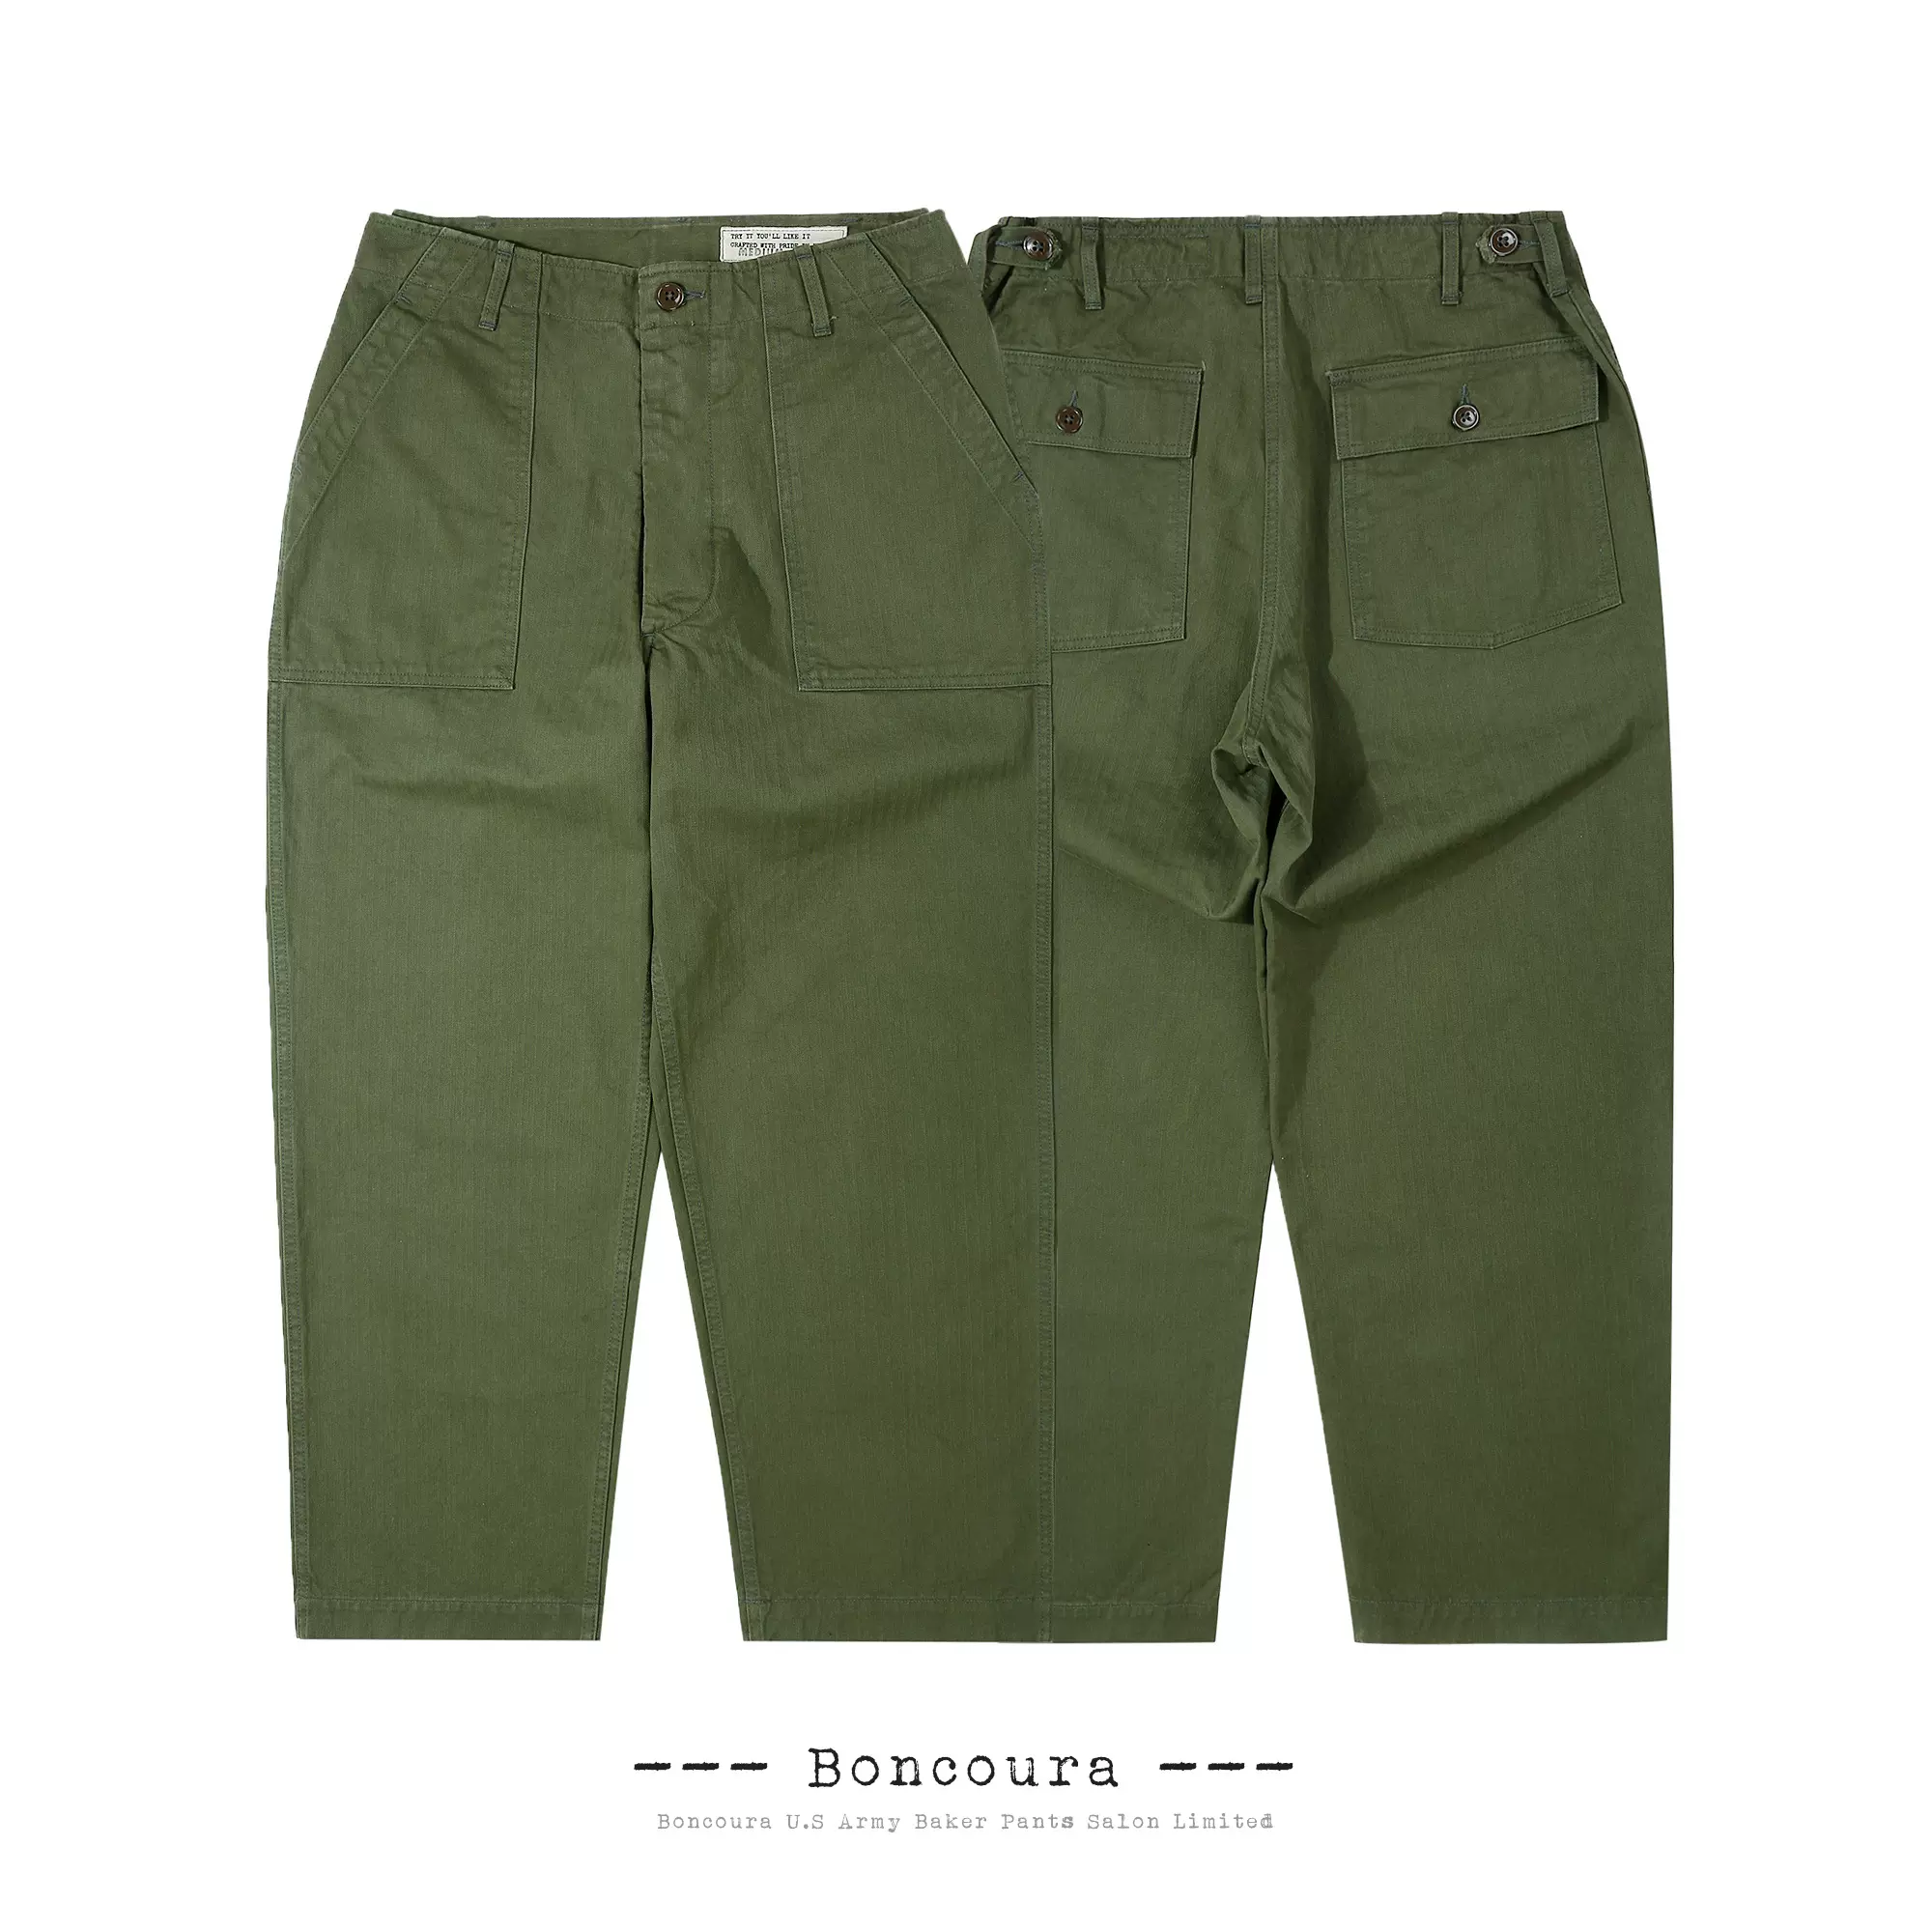 CALEE WEST POINT ARMY CHINO PANTS 中磅高密度西点棉织休闲裤-Taobao